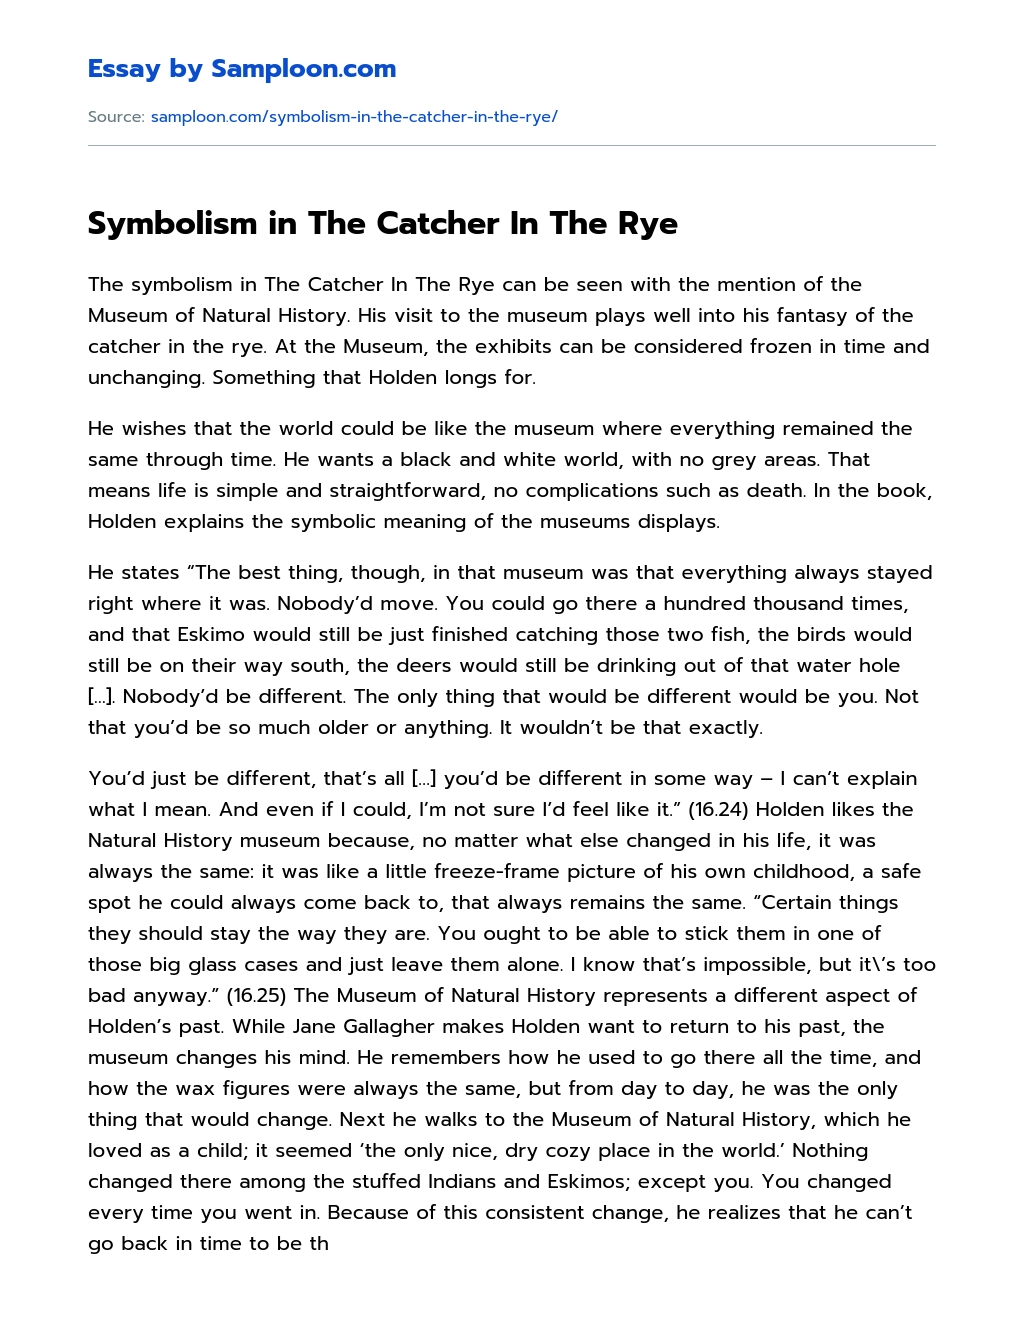 Symbolism in The Catcher In The Rye essay